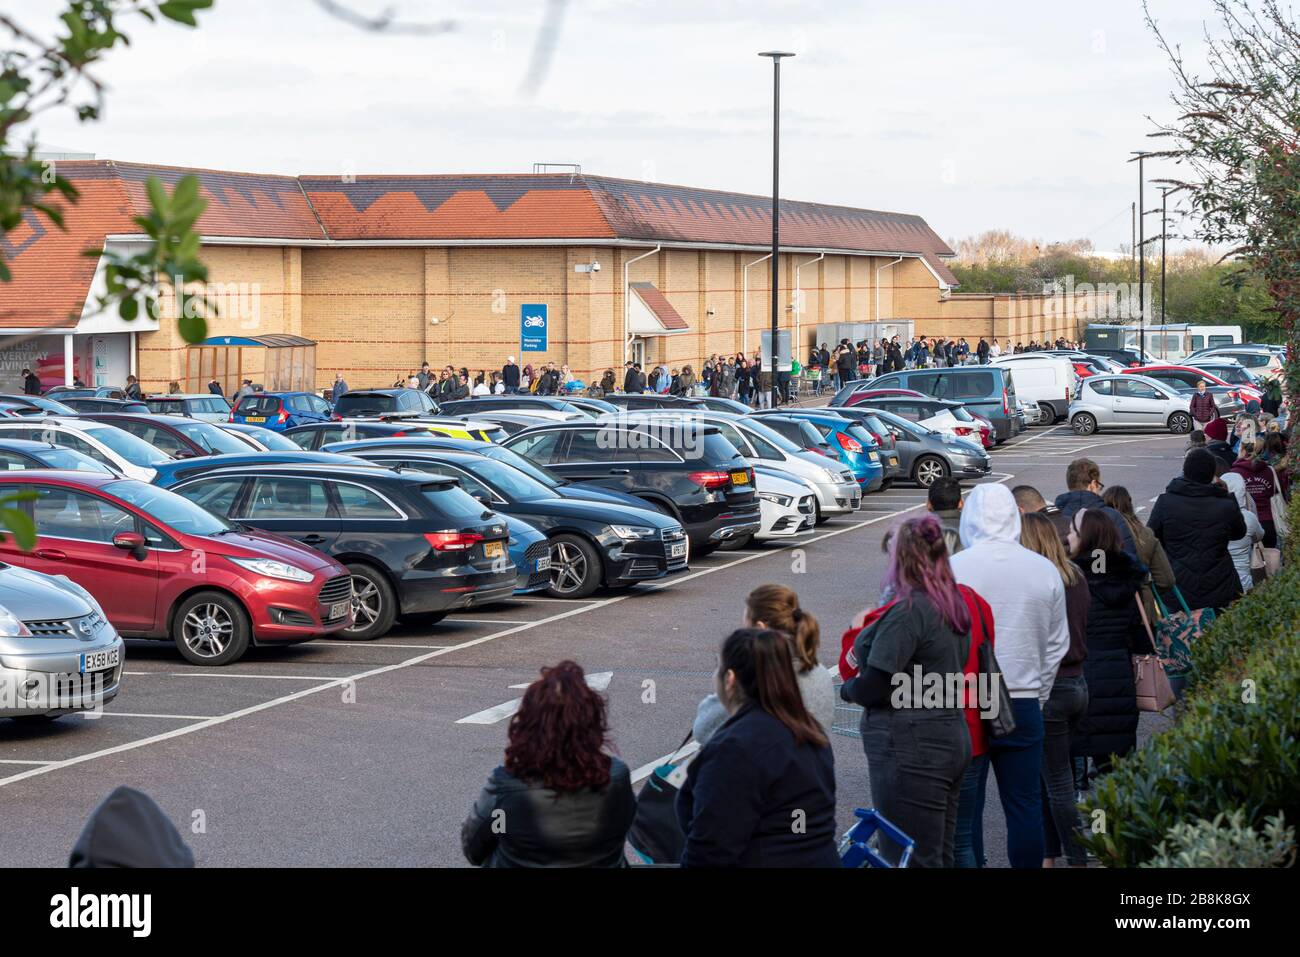 Tesco supermarket in Southend on Sea with huge numbers of shoppers queuing in morning. Panic buying shopping standing close together during COVID-19 Stock Photo